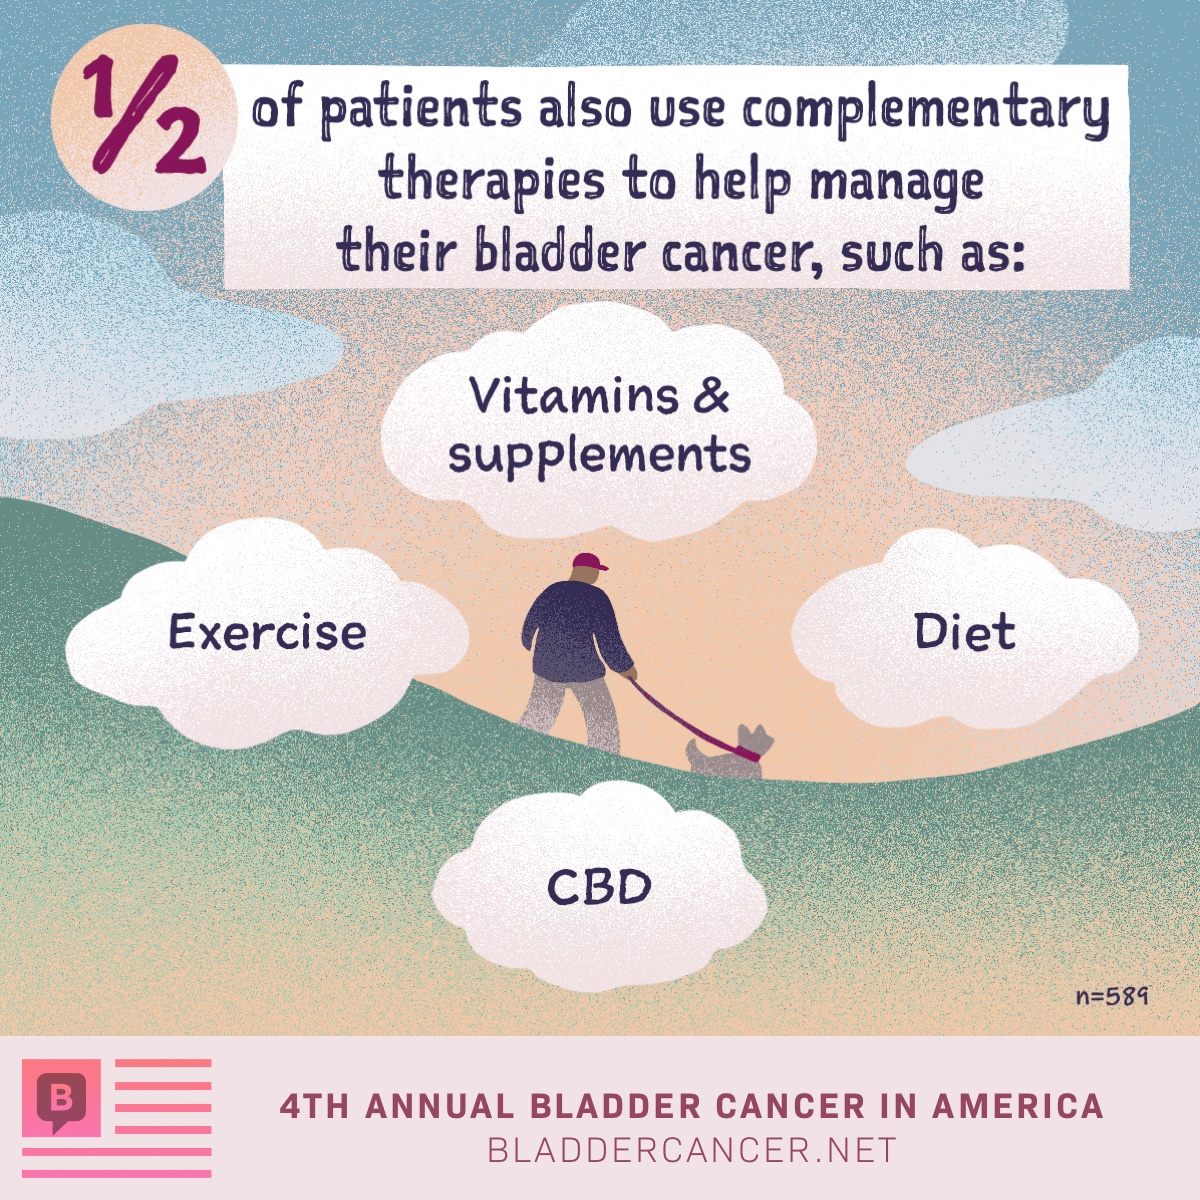 ½ of patients also use complementary therapies to help manage their bladder cancer, like vitamins and supplements, exercise, diet, and CBD.